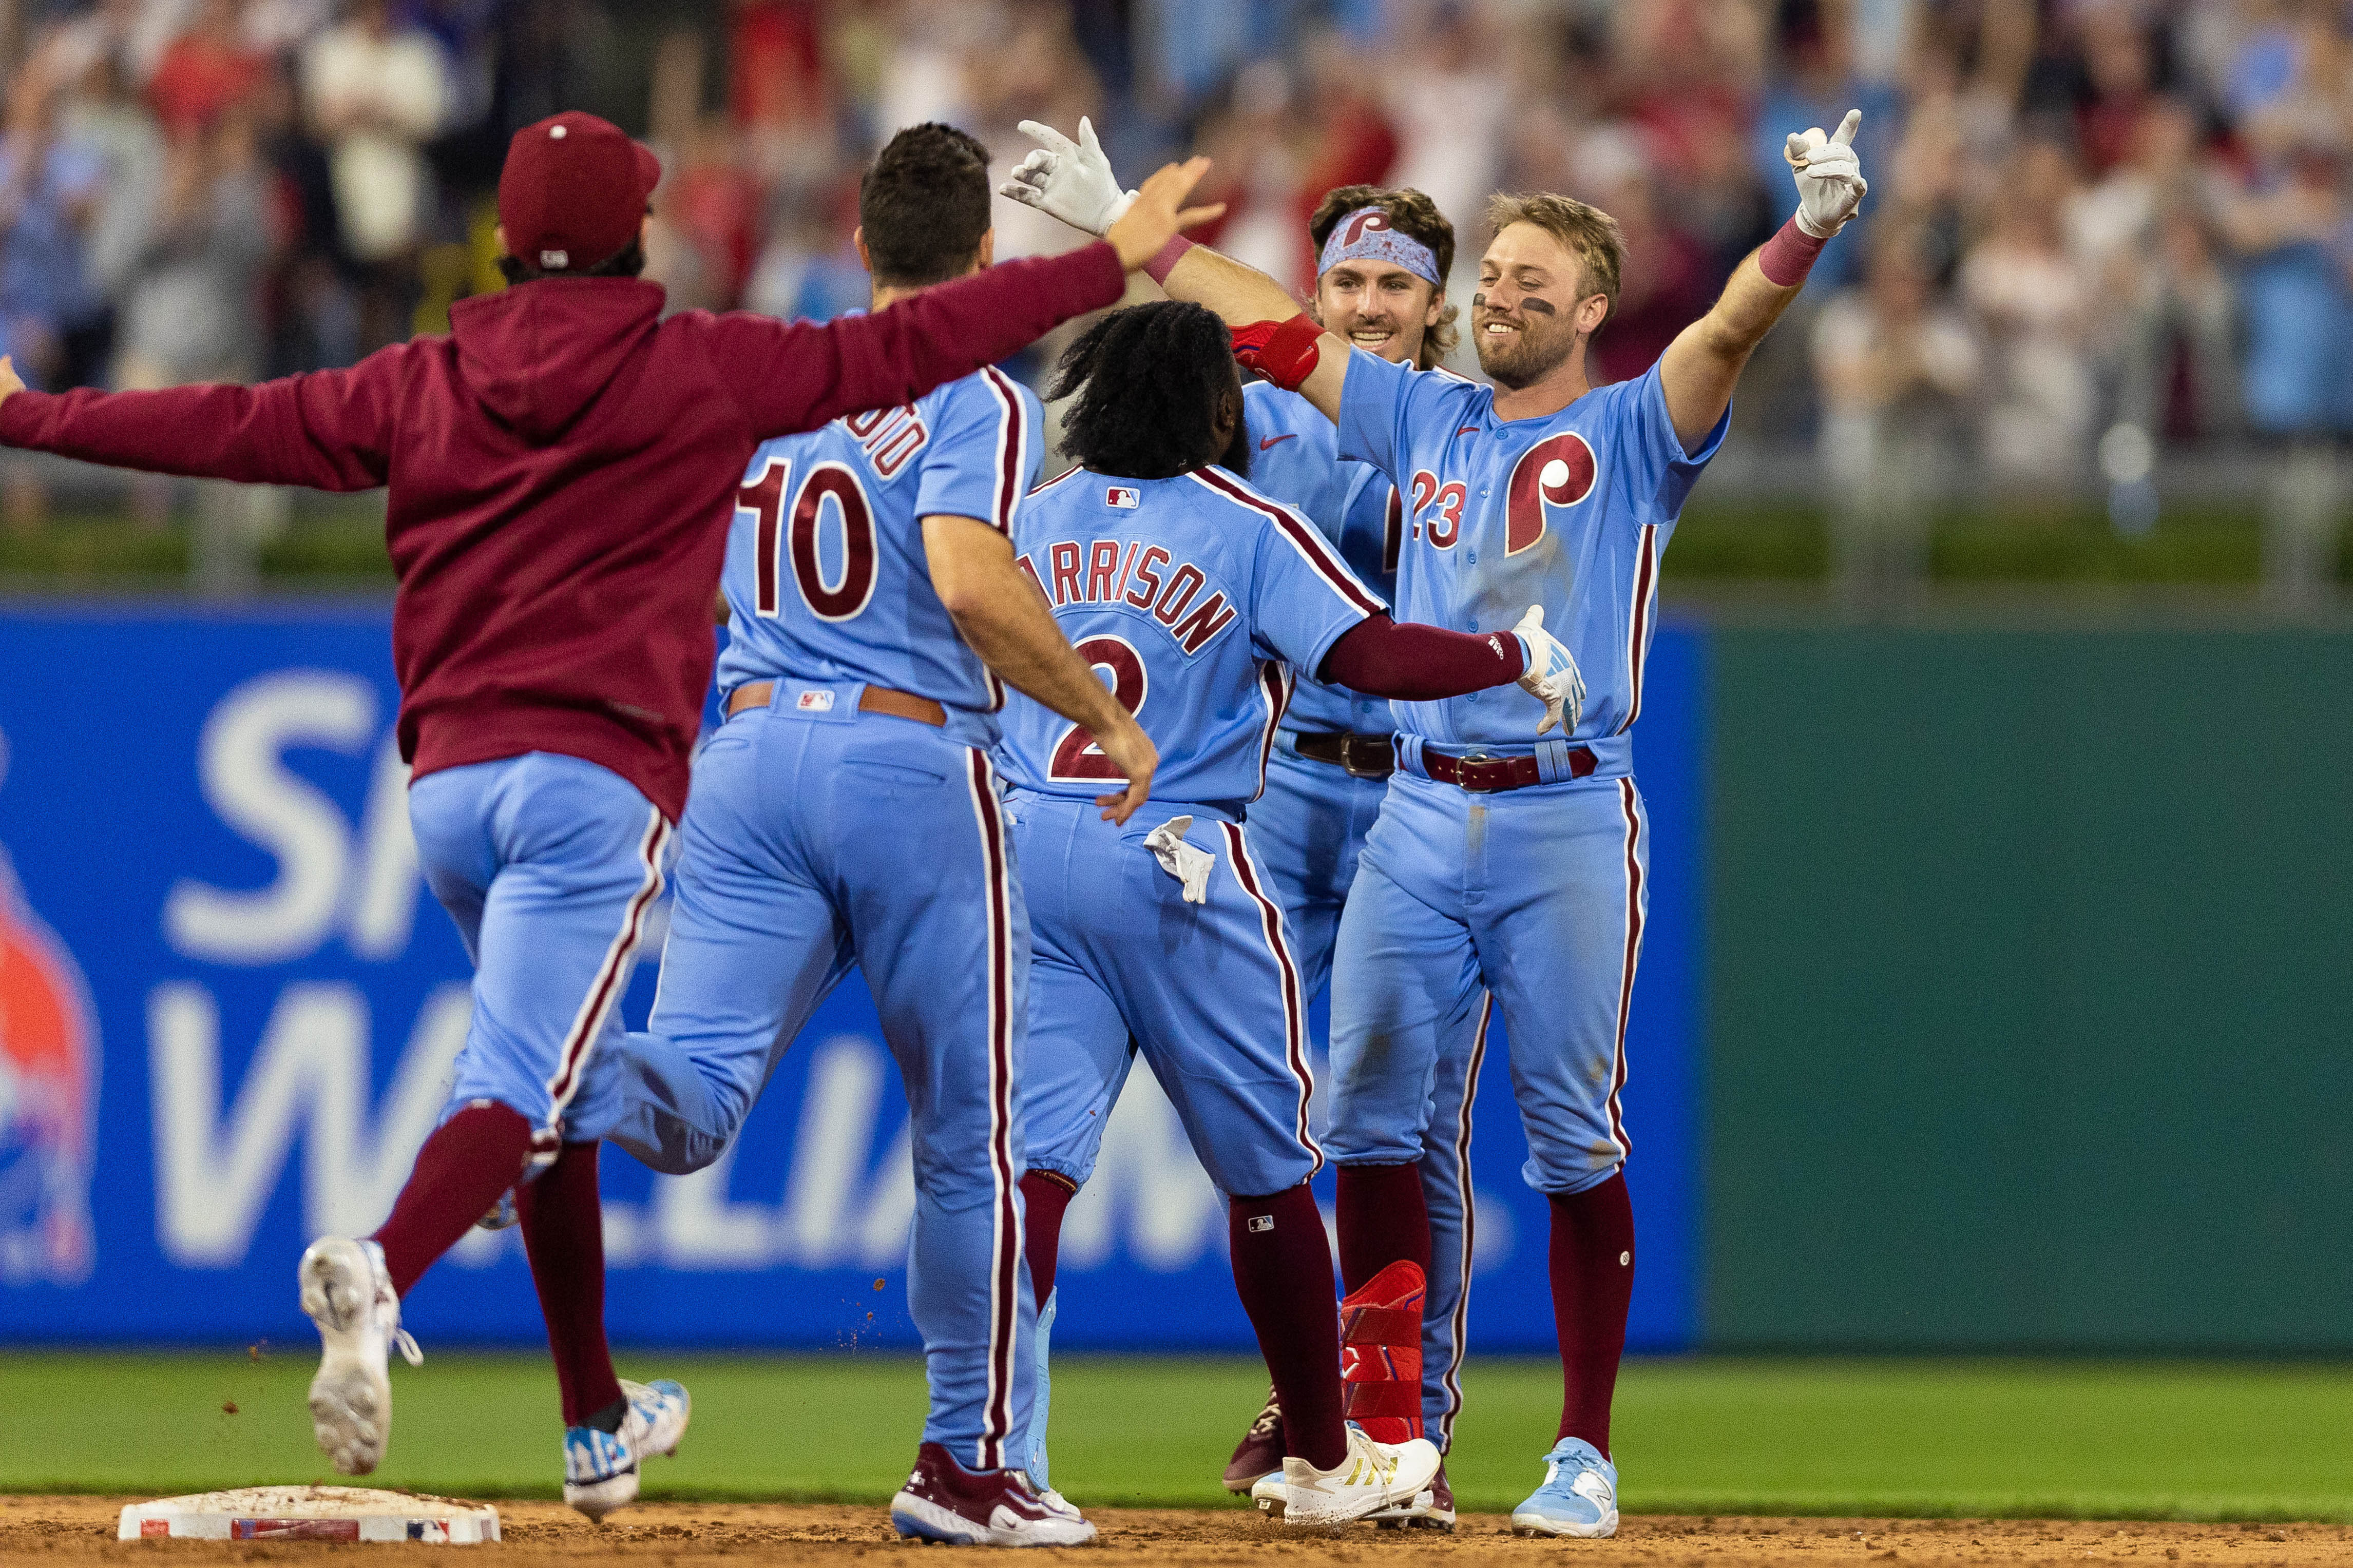 Phillies lose late lead, rally to finish 3-game sweep of Tigers